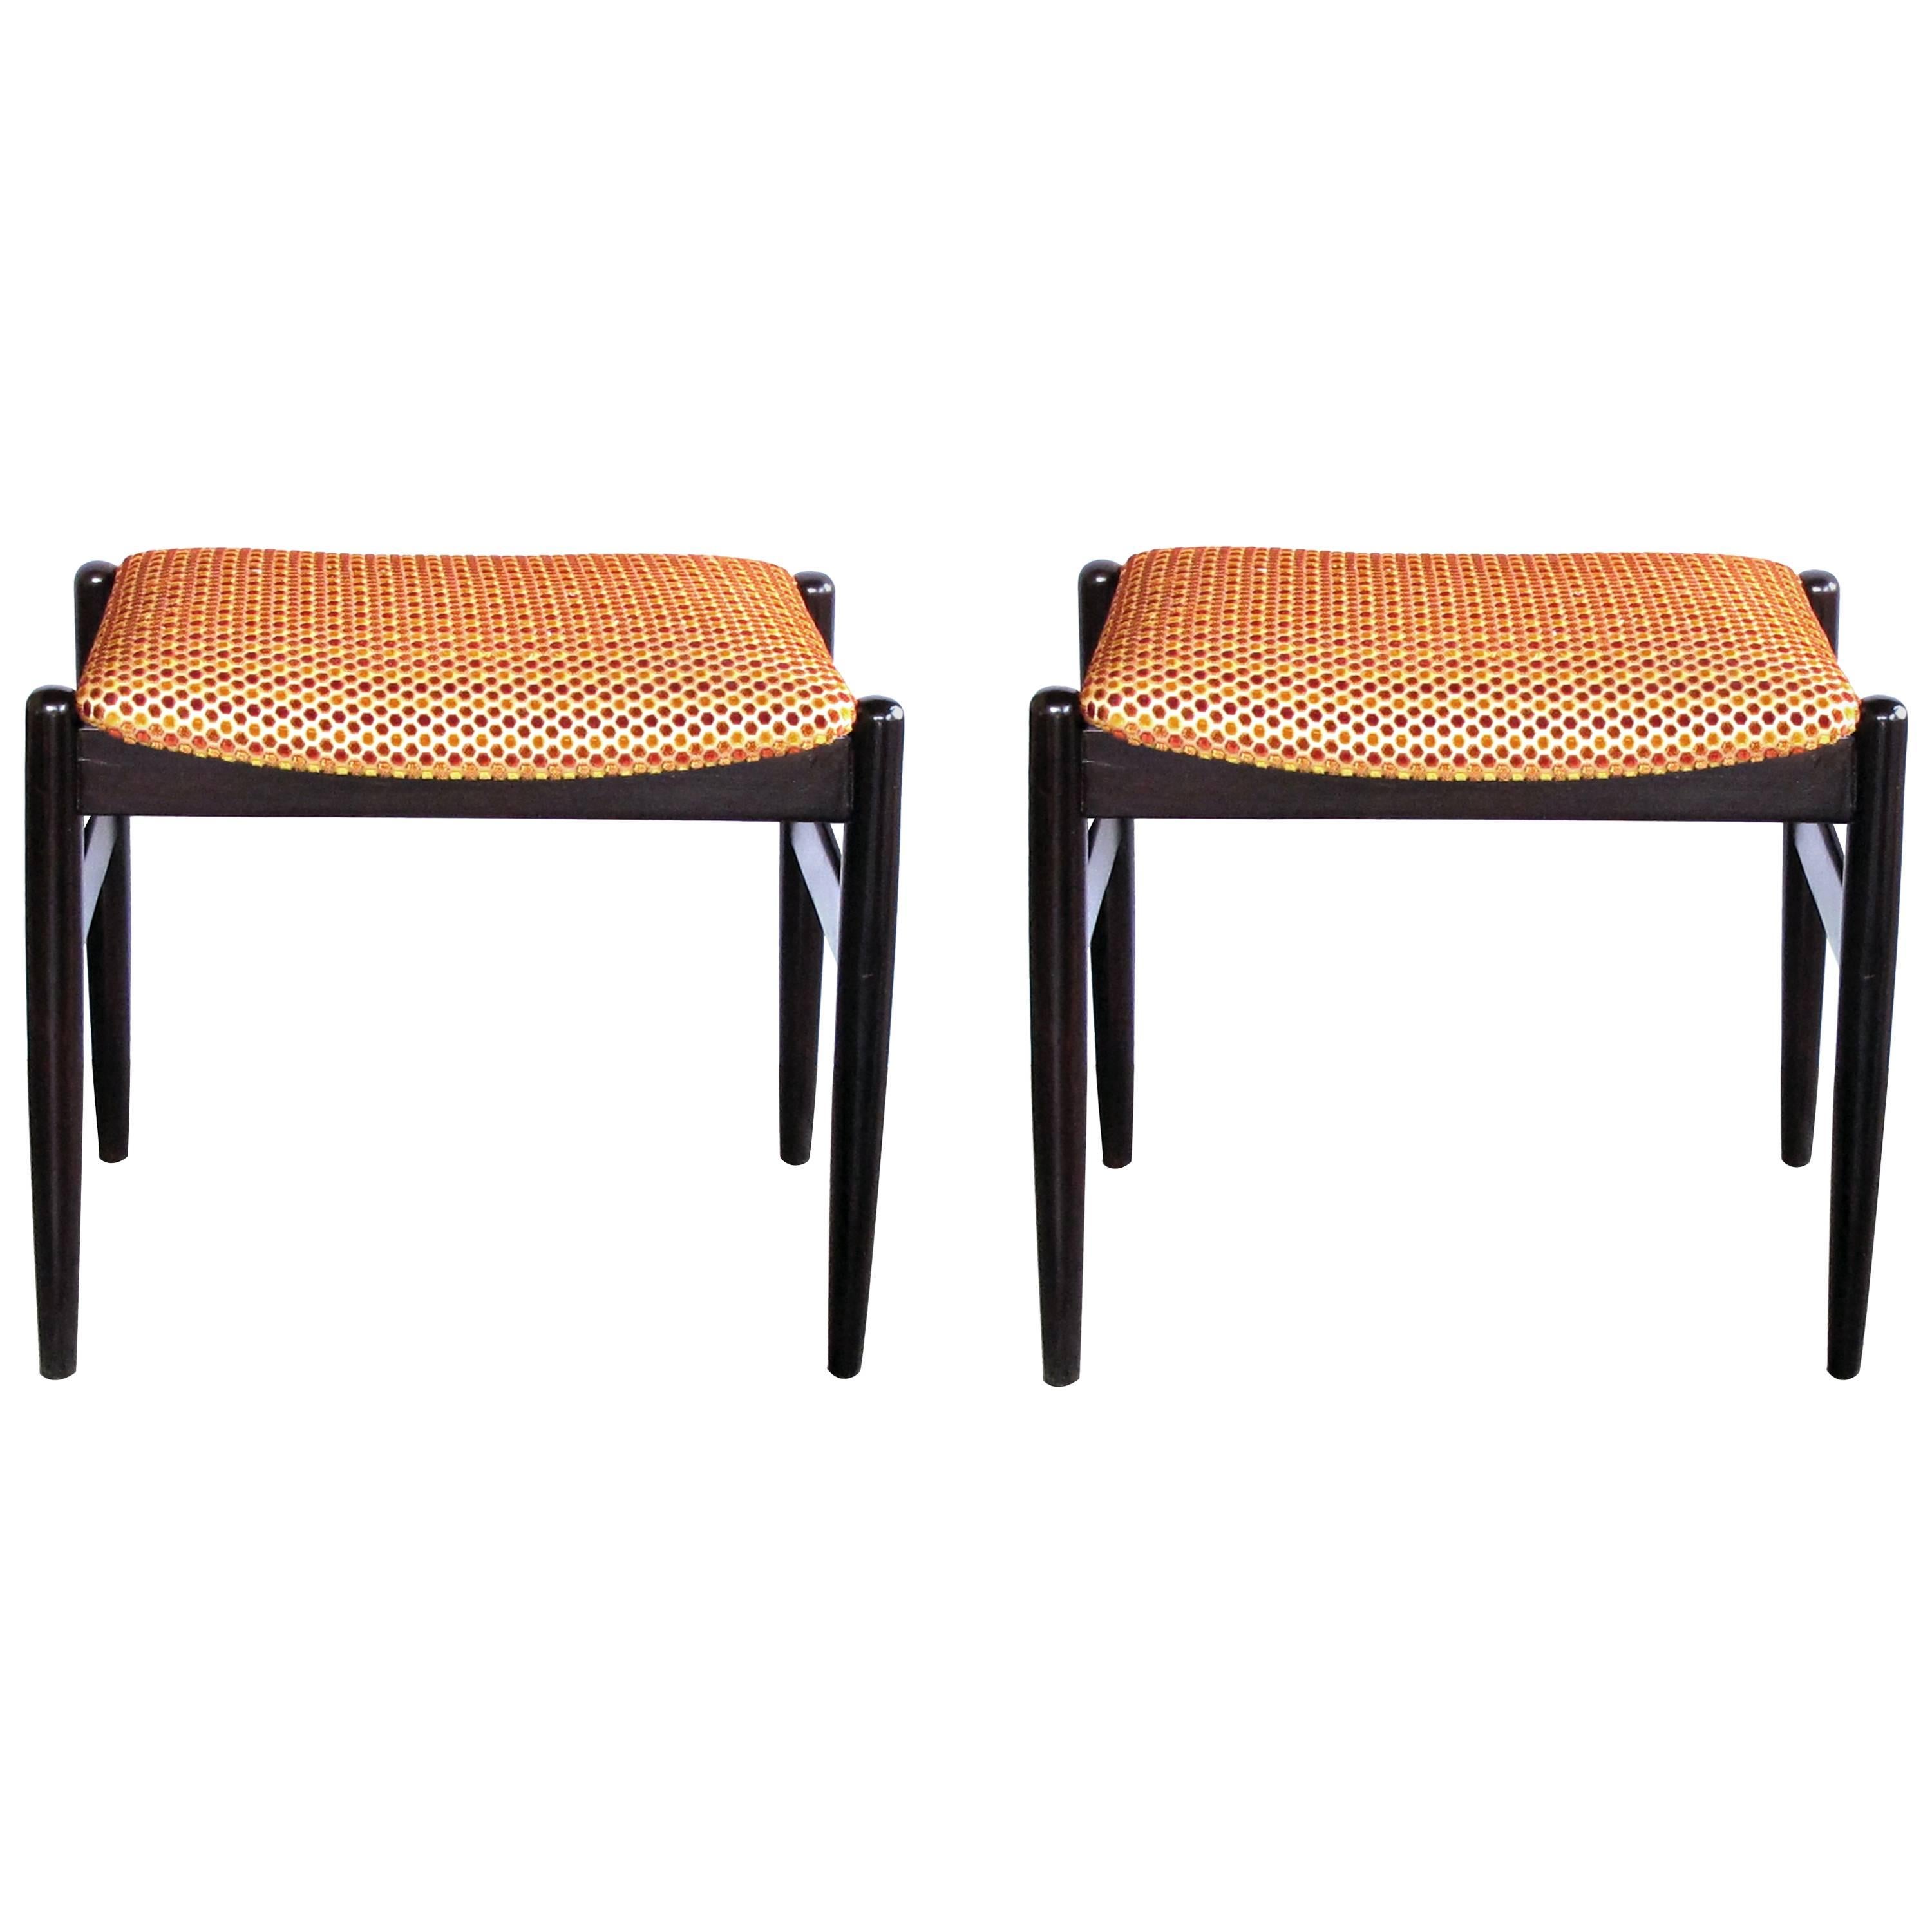 Classic Pair of Danish Modern 1960s Deep-Brown Lacquered Benches/Stools